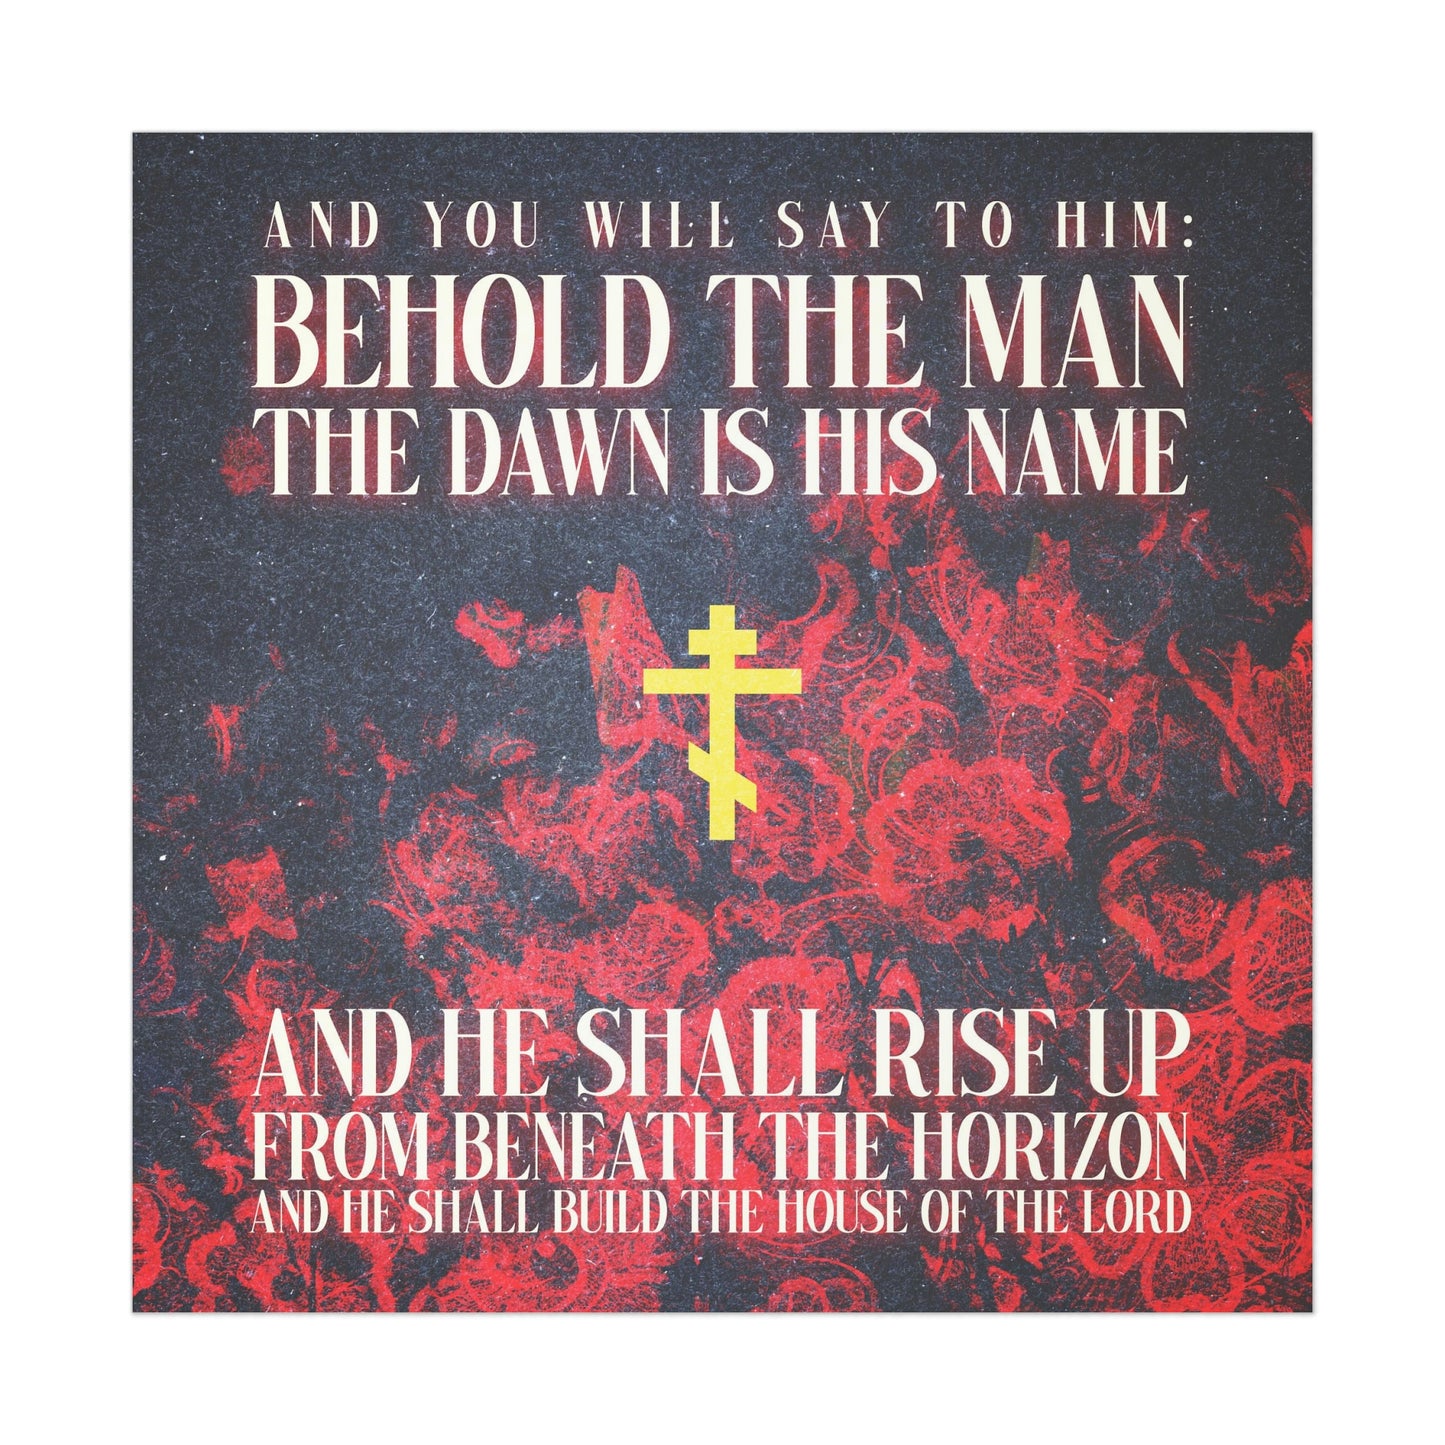 Behold the Man, the Dawn is His Name No. 1 | Orthodox Christian Art Poster